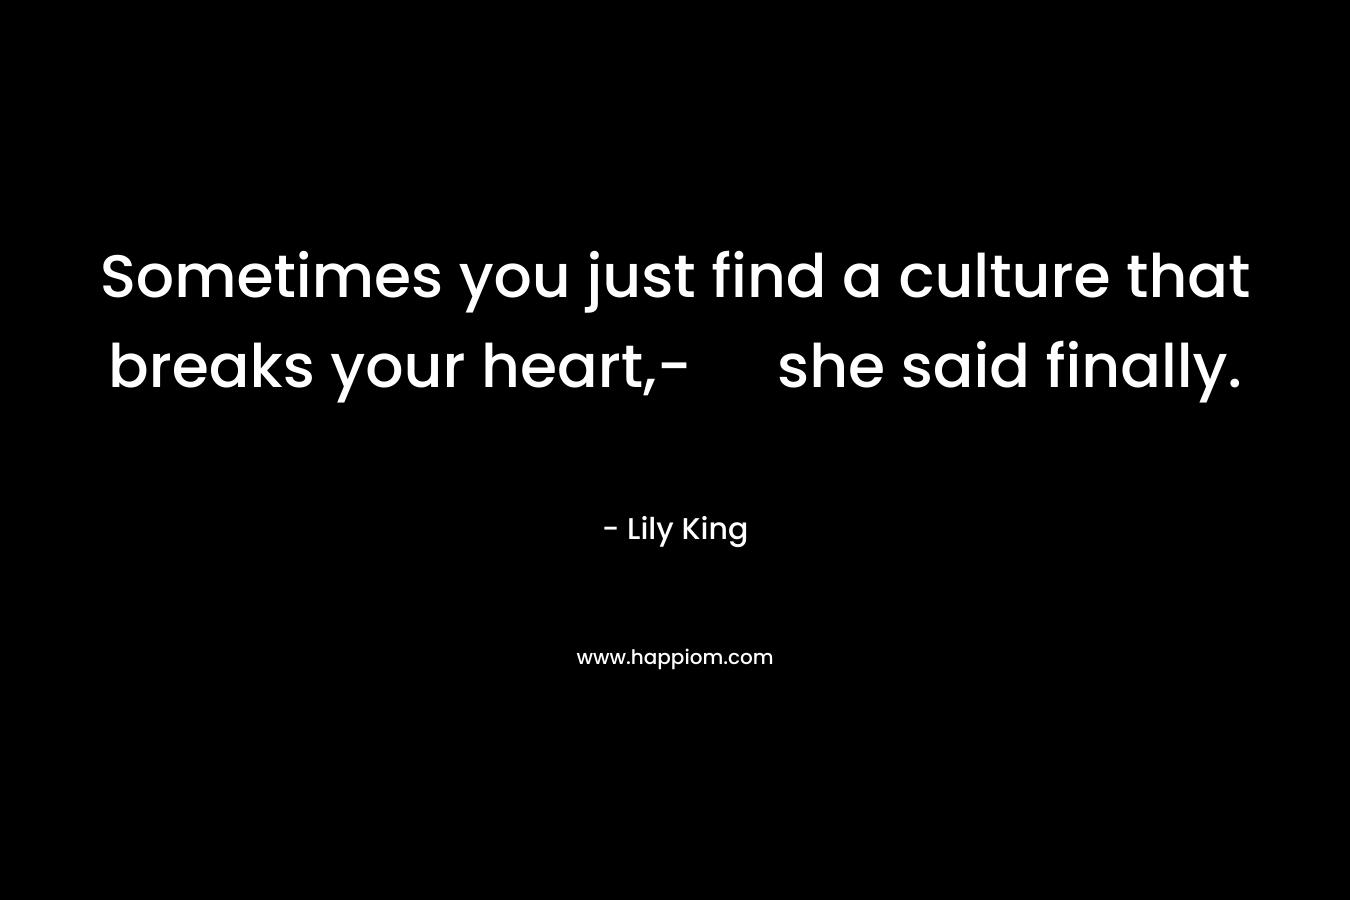 Sometimes you just find a culture that breaks your heart,- she said finally. – Lily King